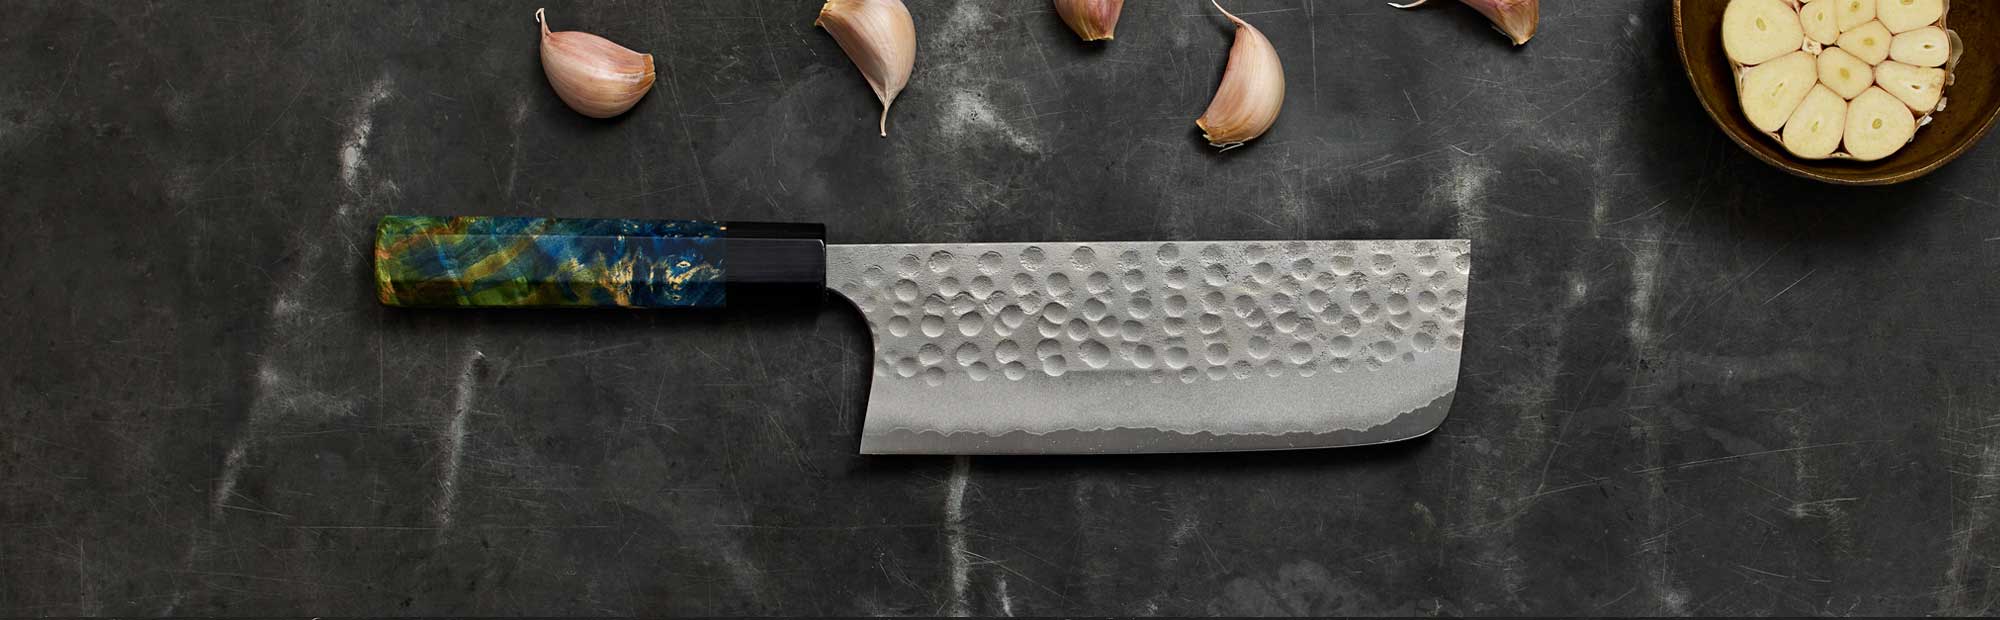 Handpicked: The Best Chef's Knives to Buy Right Now